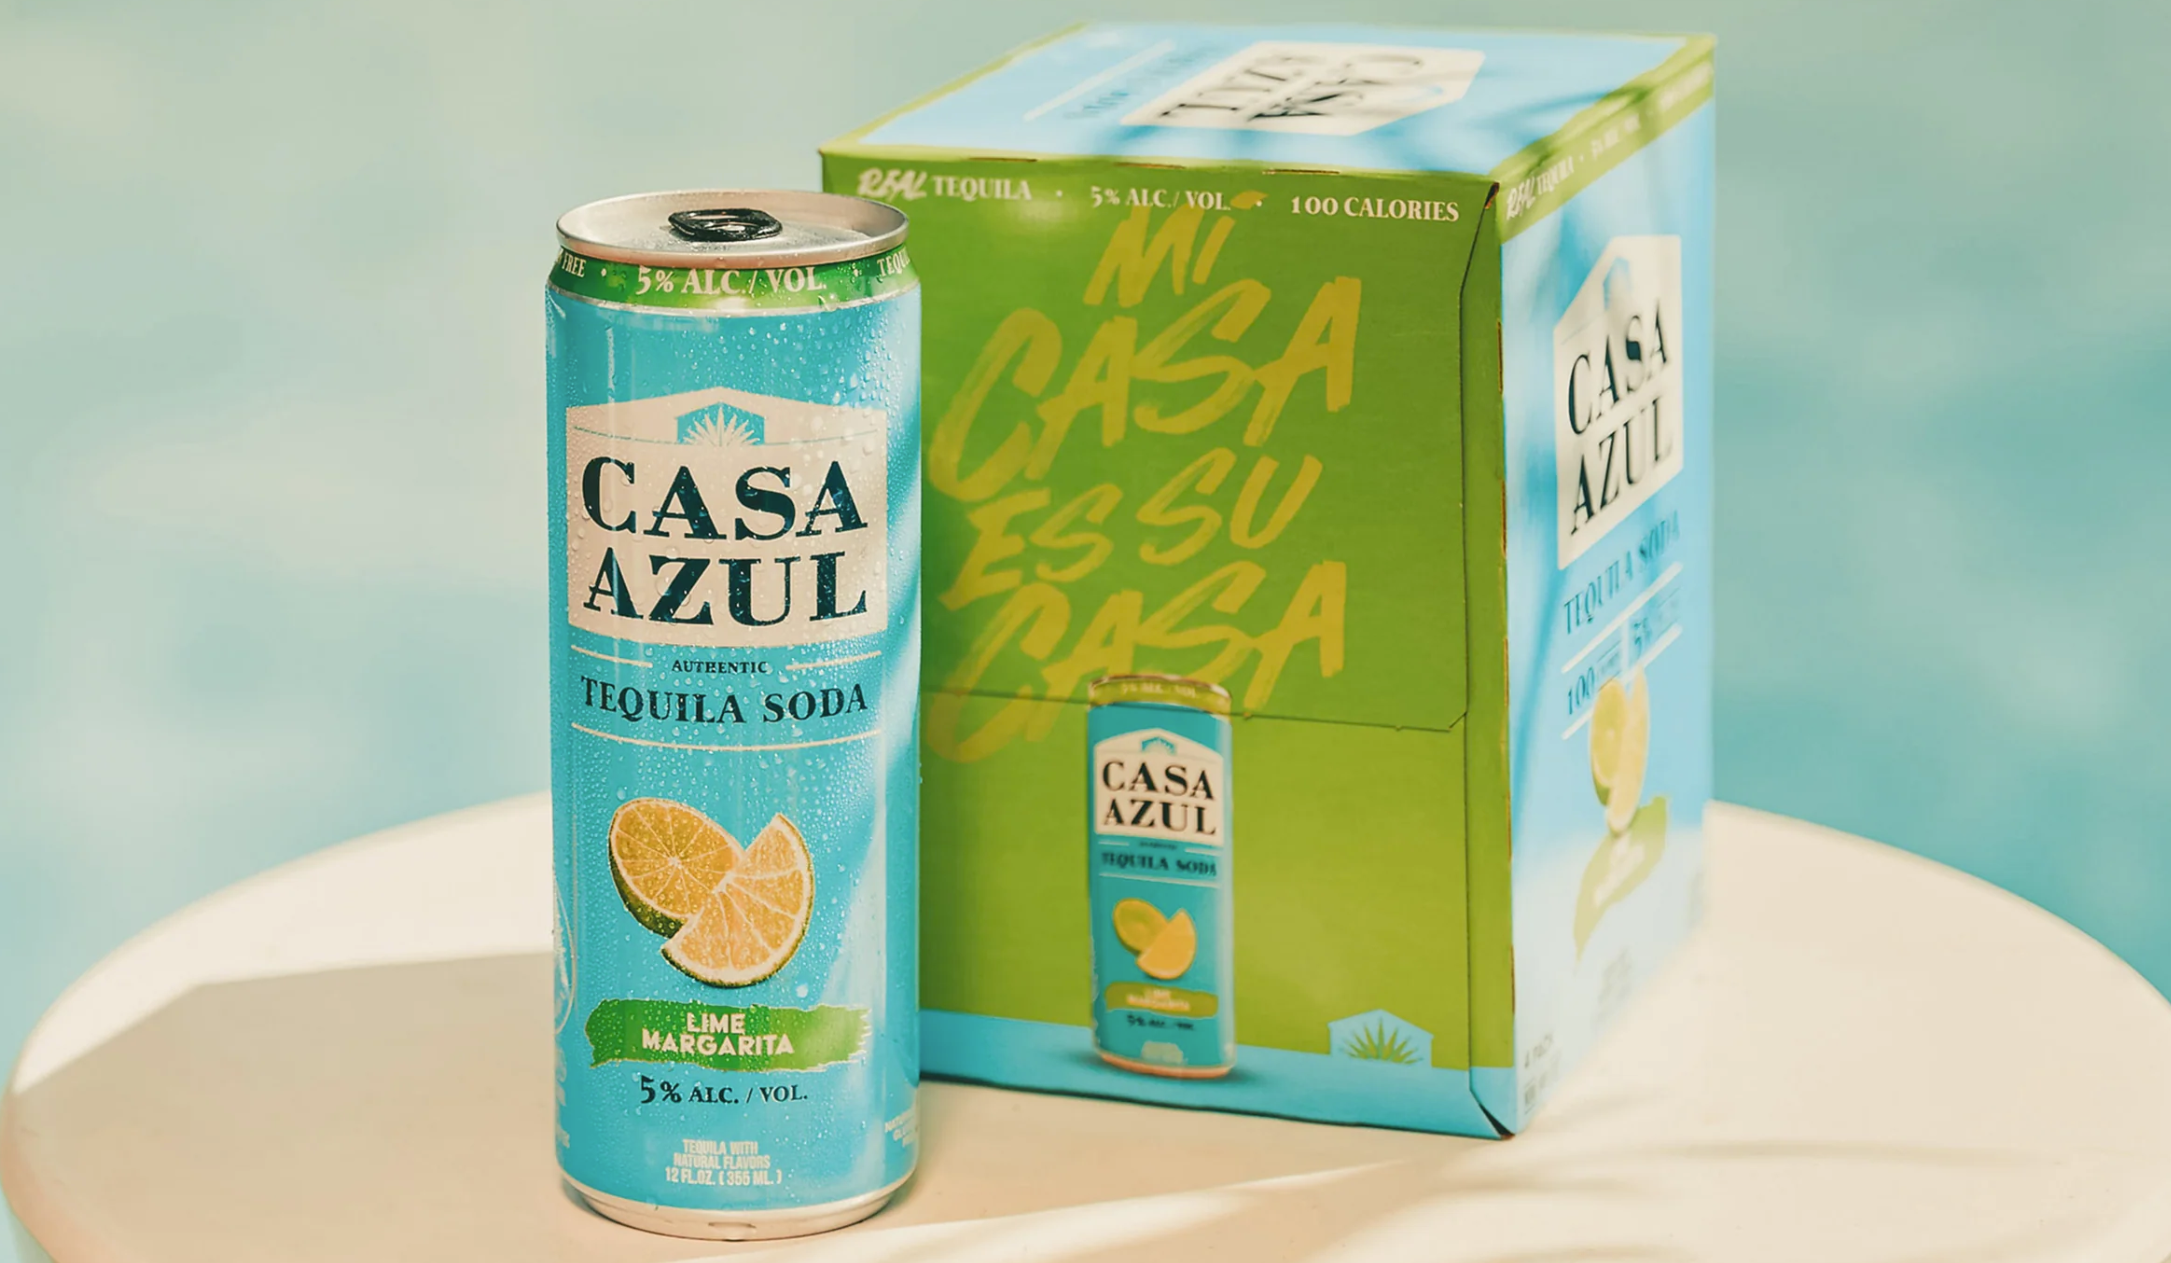 Casa Azul Tequila sofa can and box on wooden table